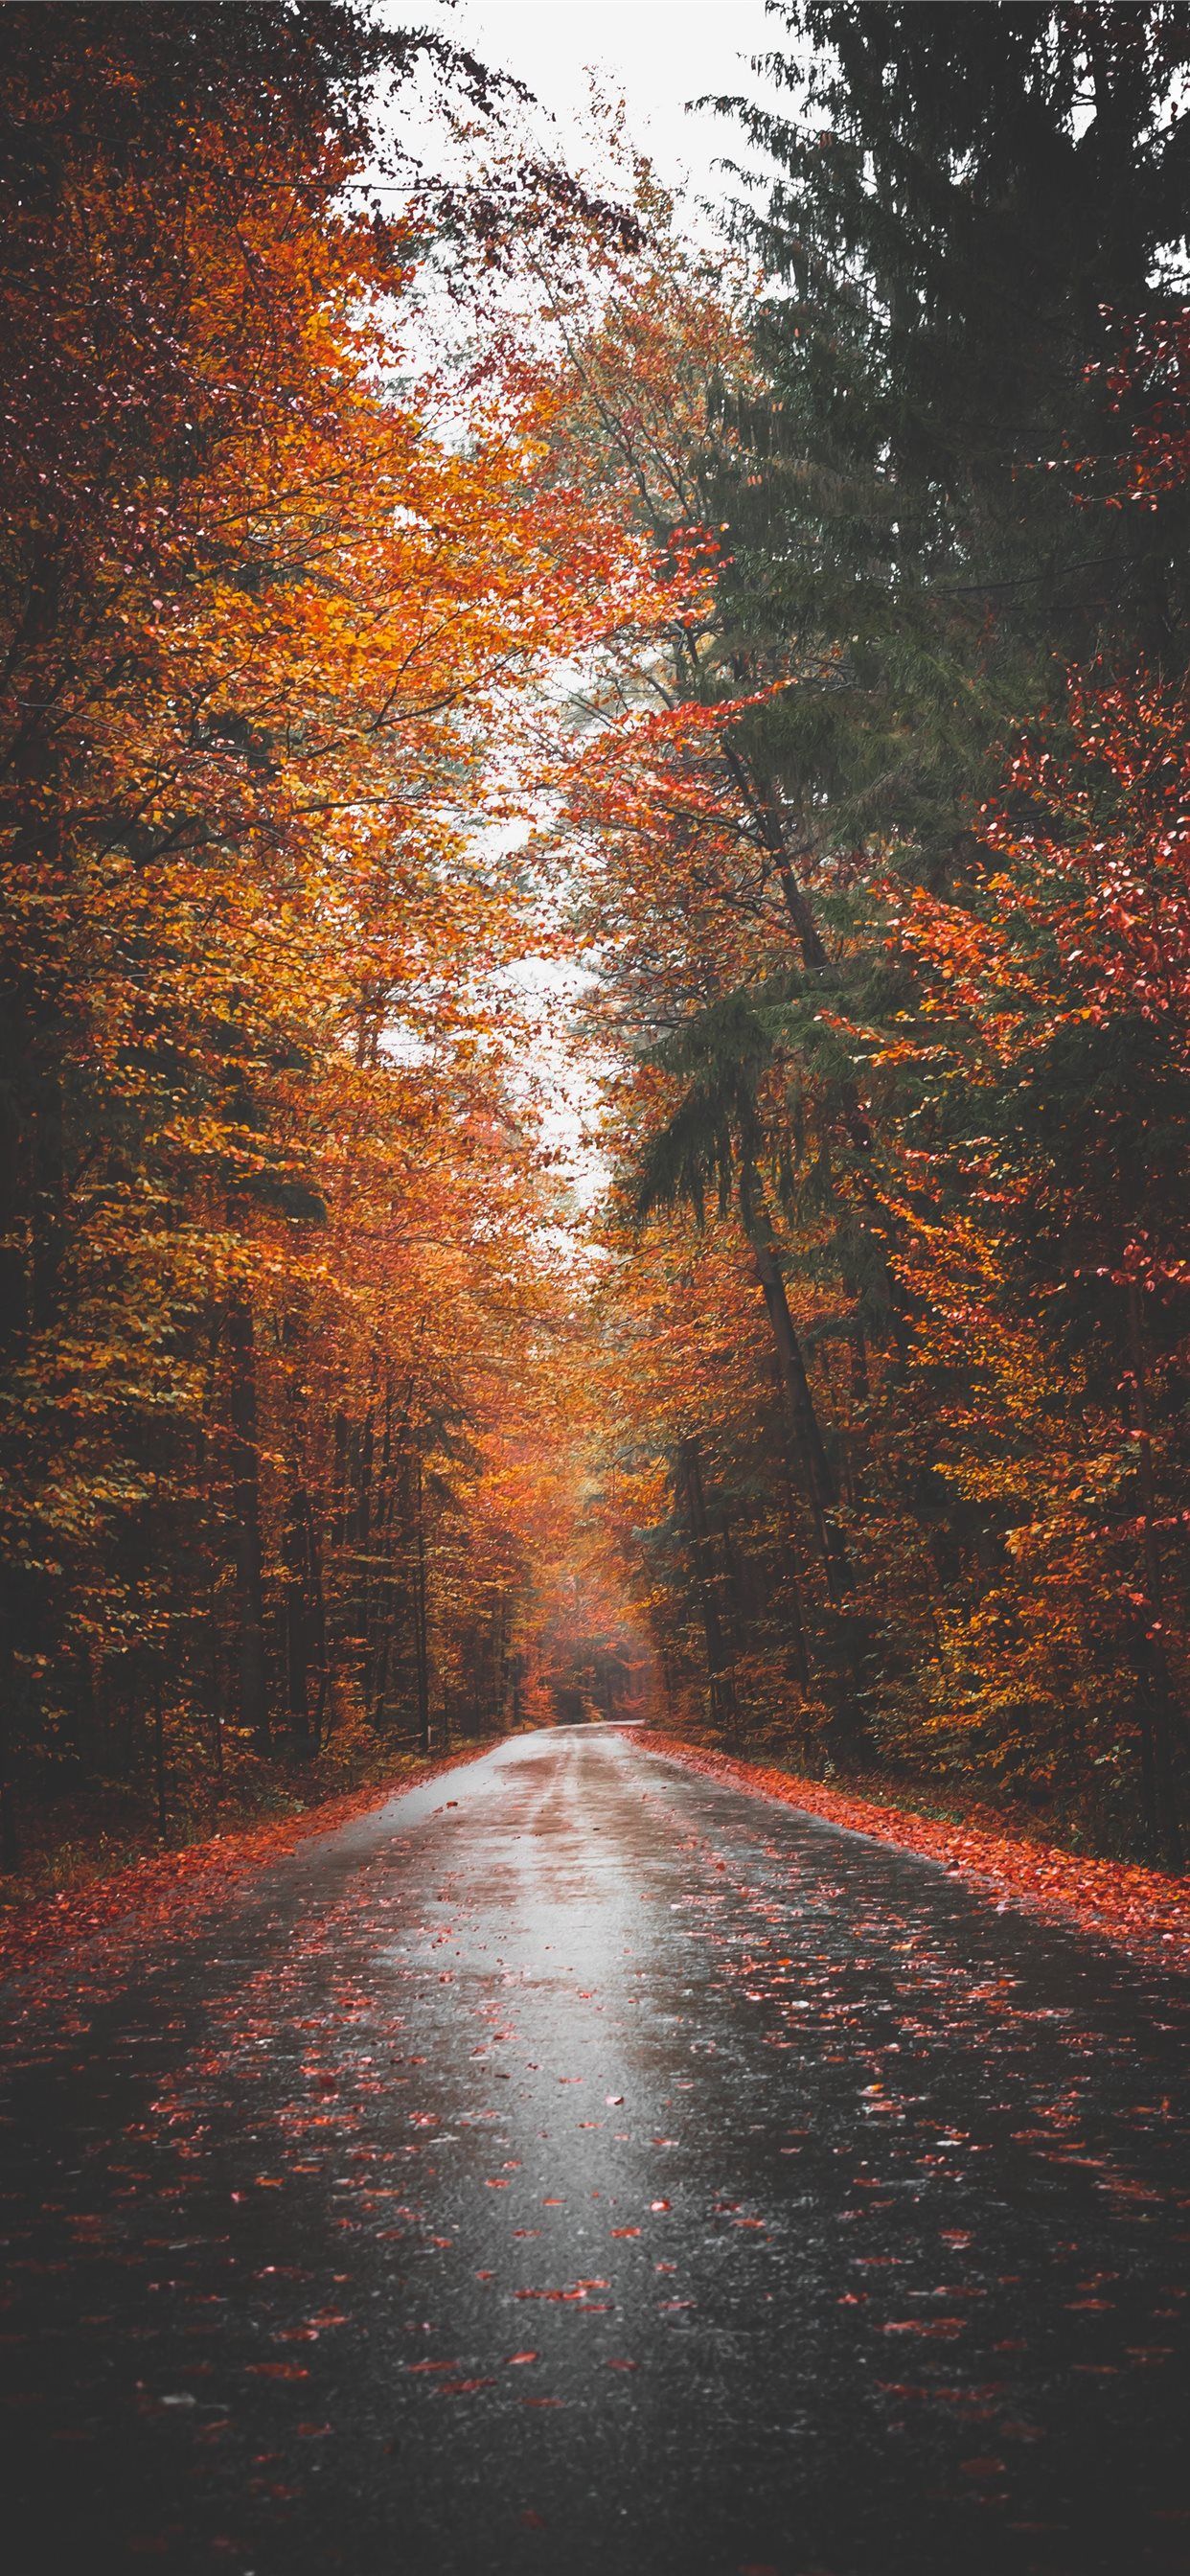 A road in the middle of a forest surrounded by trees with fall foliage - Road